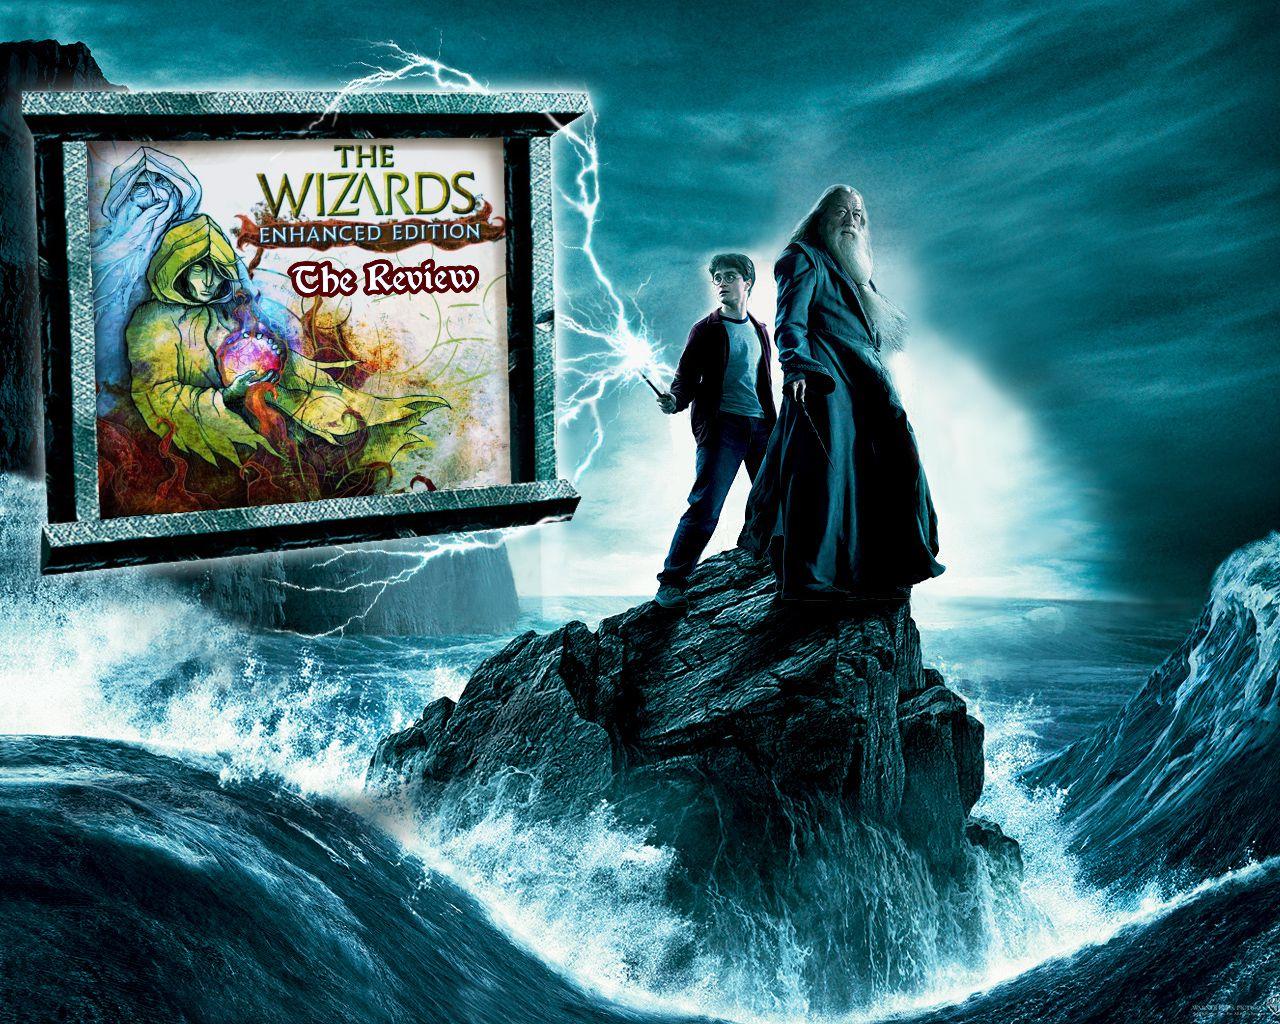 The Wizards - Enhanced Edition on Steam